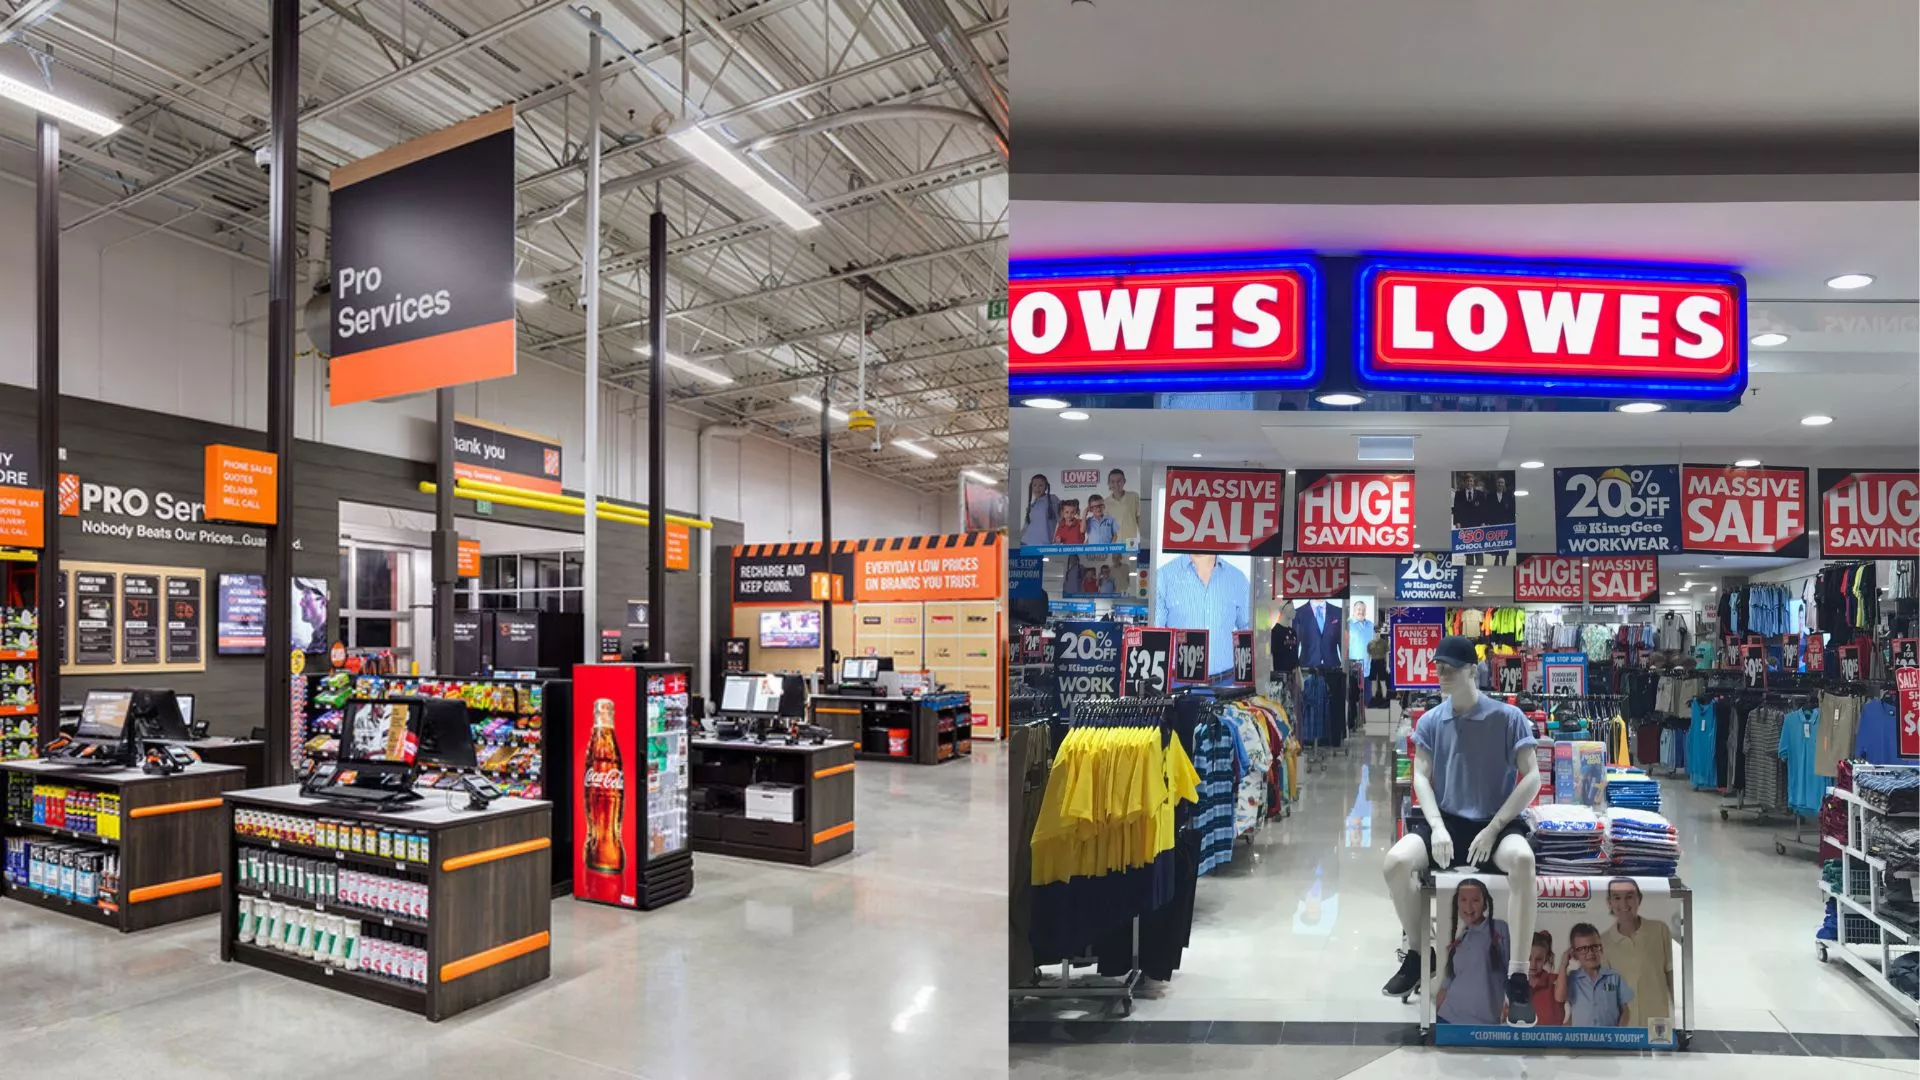 Is Home Depot less expensive than Lowes?